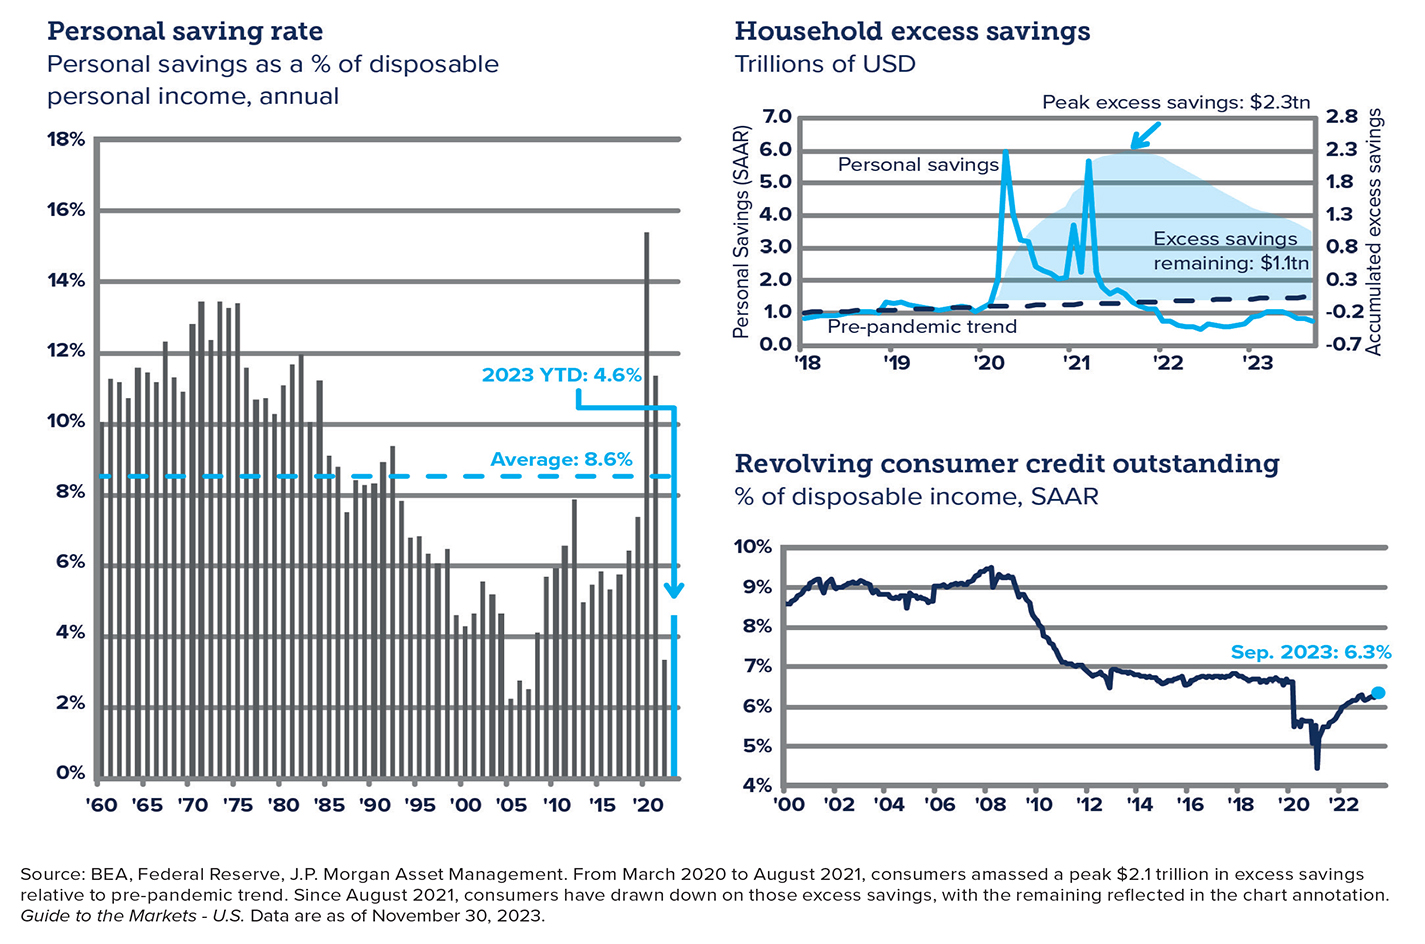 Charts showing personal saving rate, and household excess savings